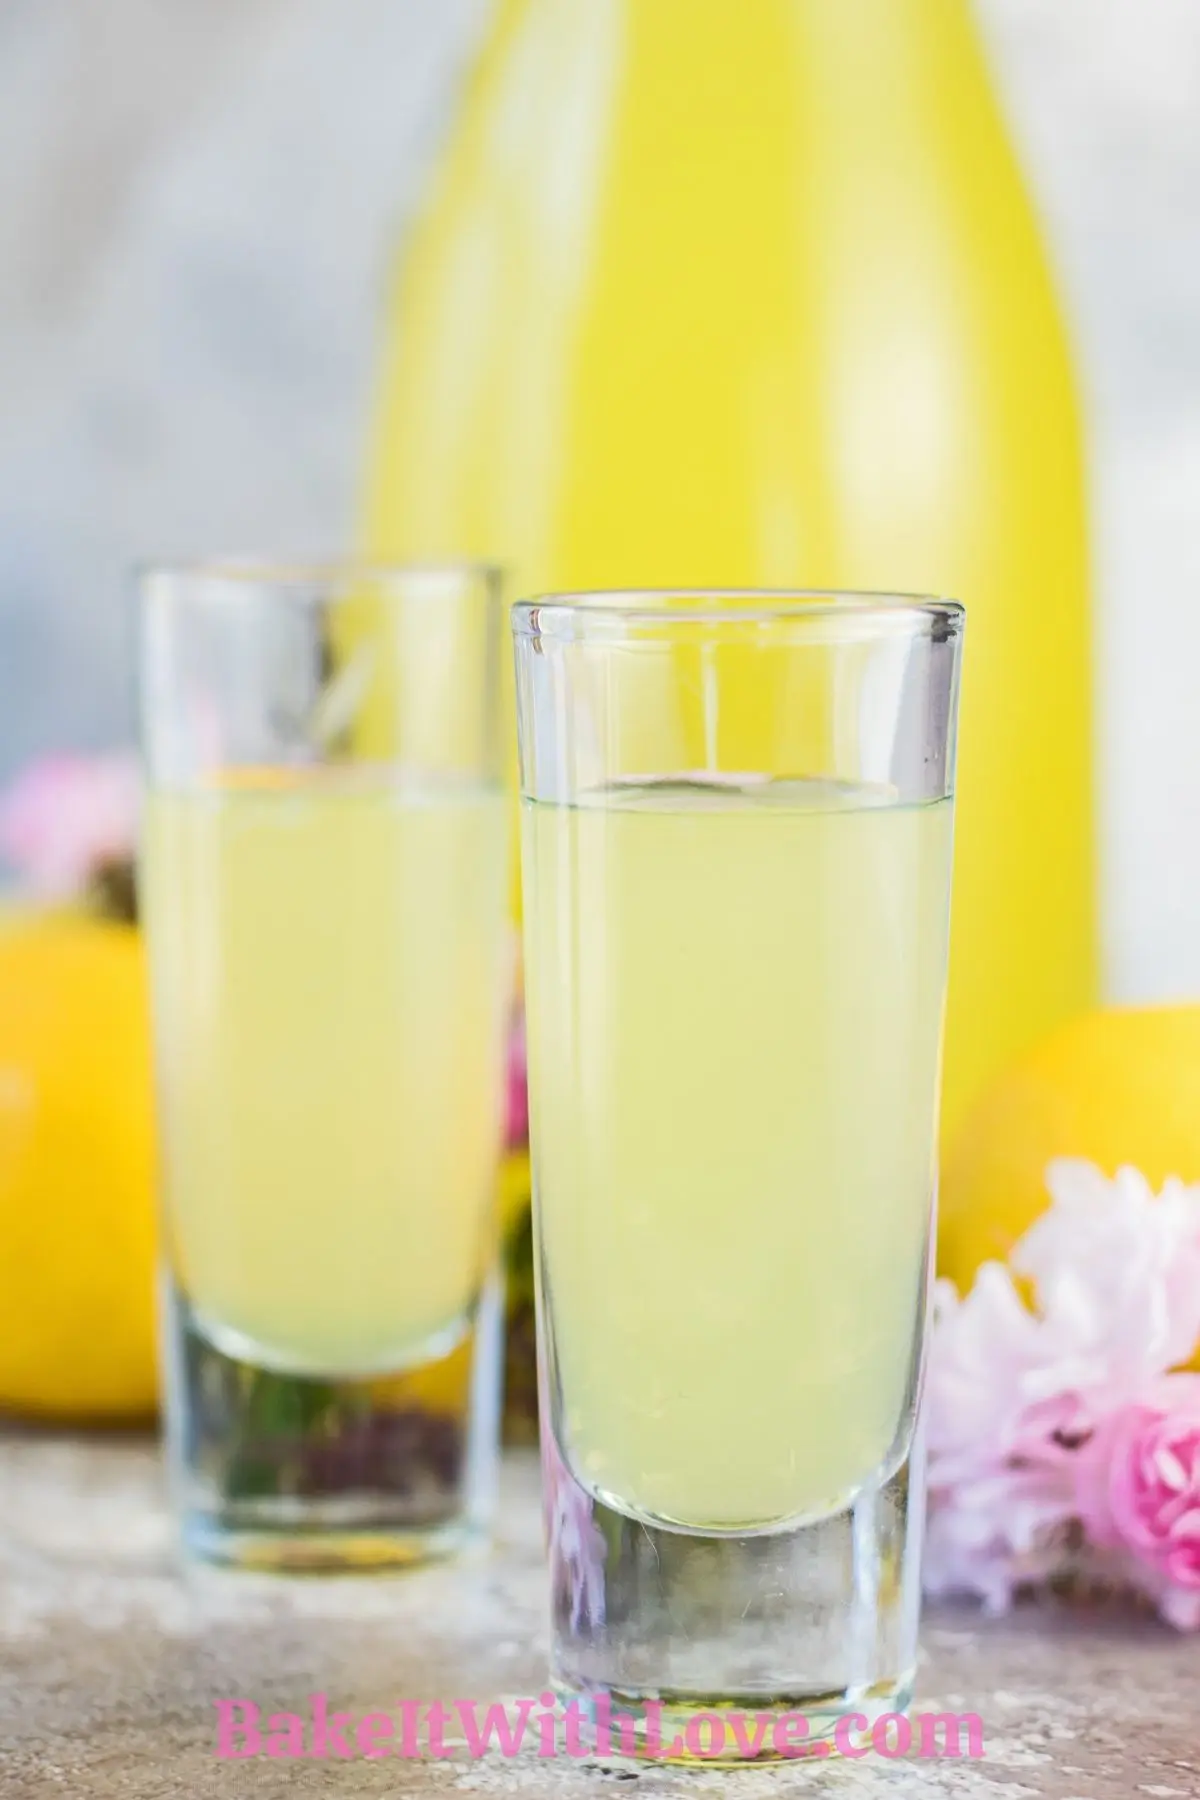 Homemade lemoncello served in small shot glasses with fruit and pink flowers in background.